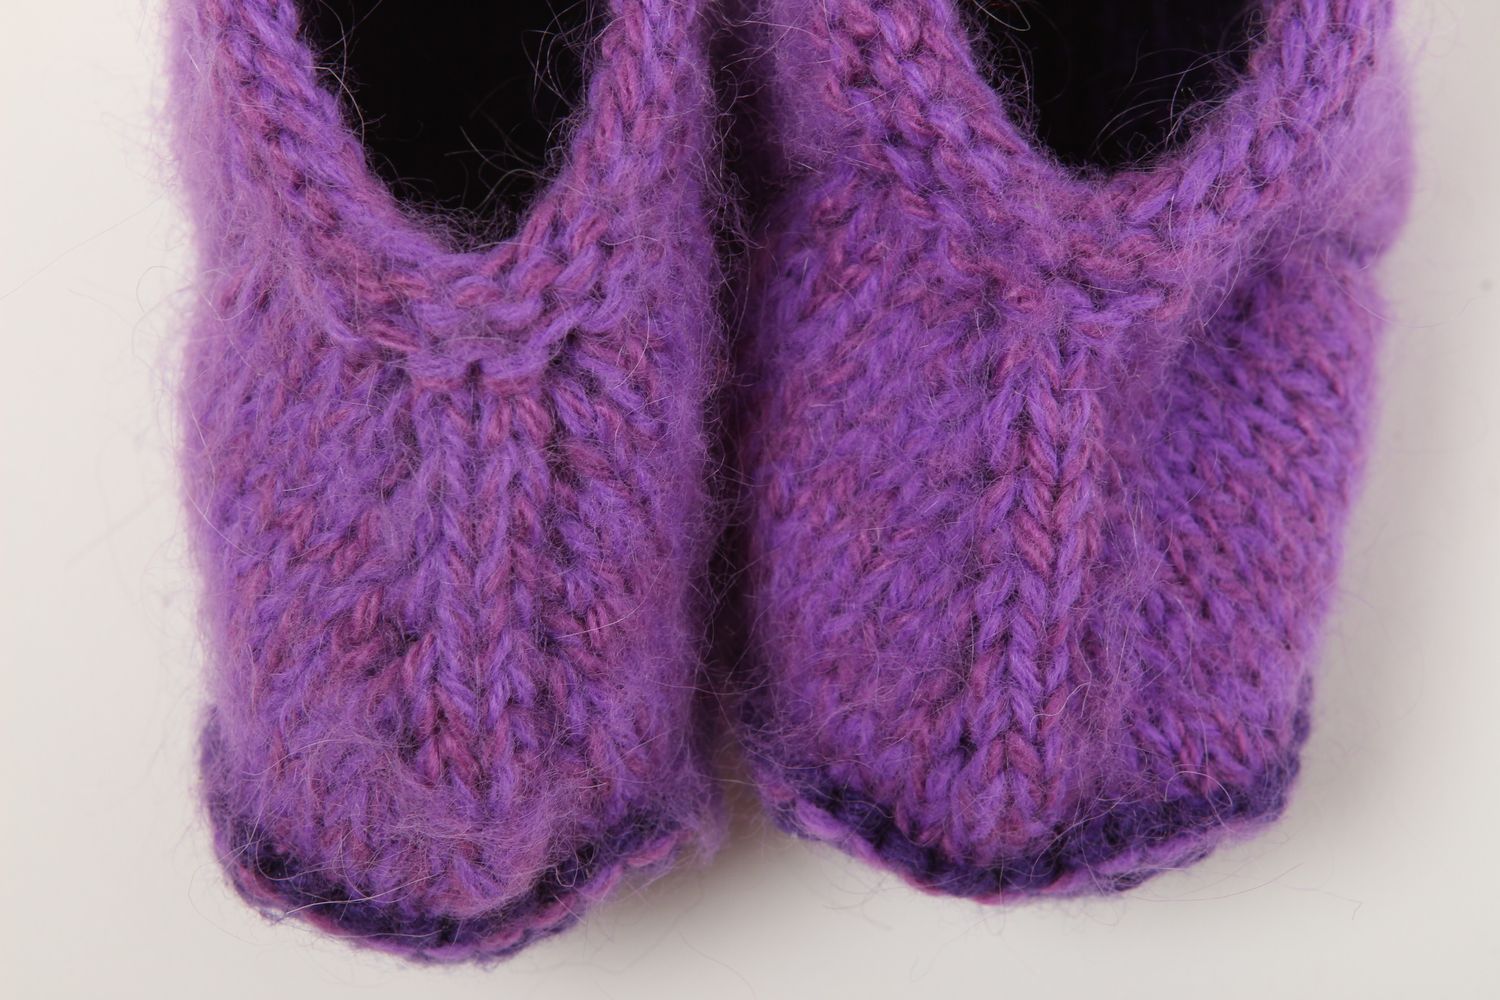 Beautiful handmade knitted slippers warm baby slippers house shoes gift ideas photo 2